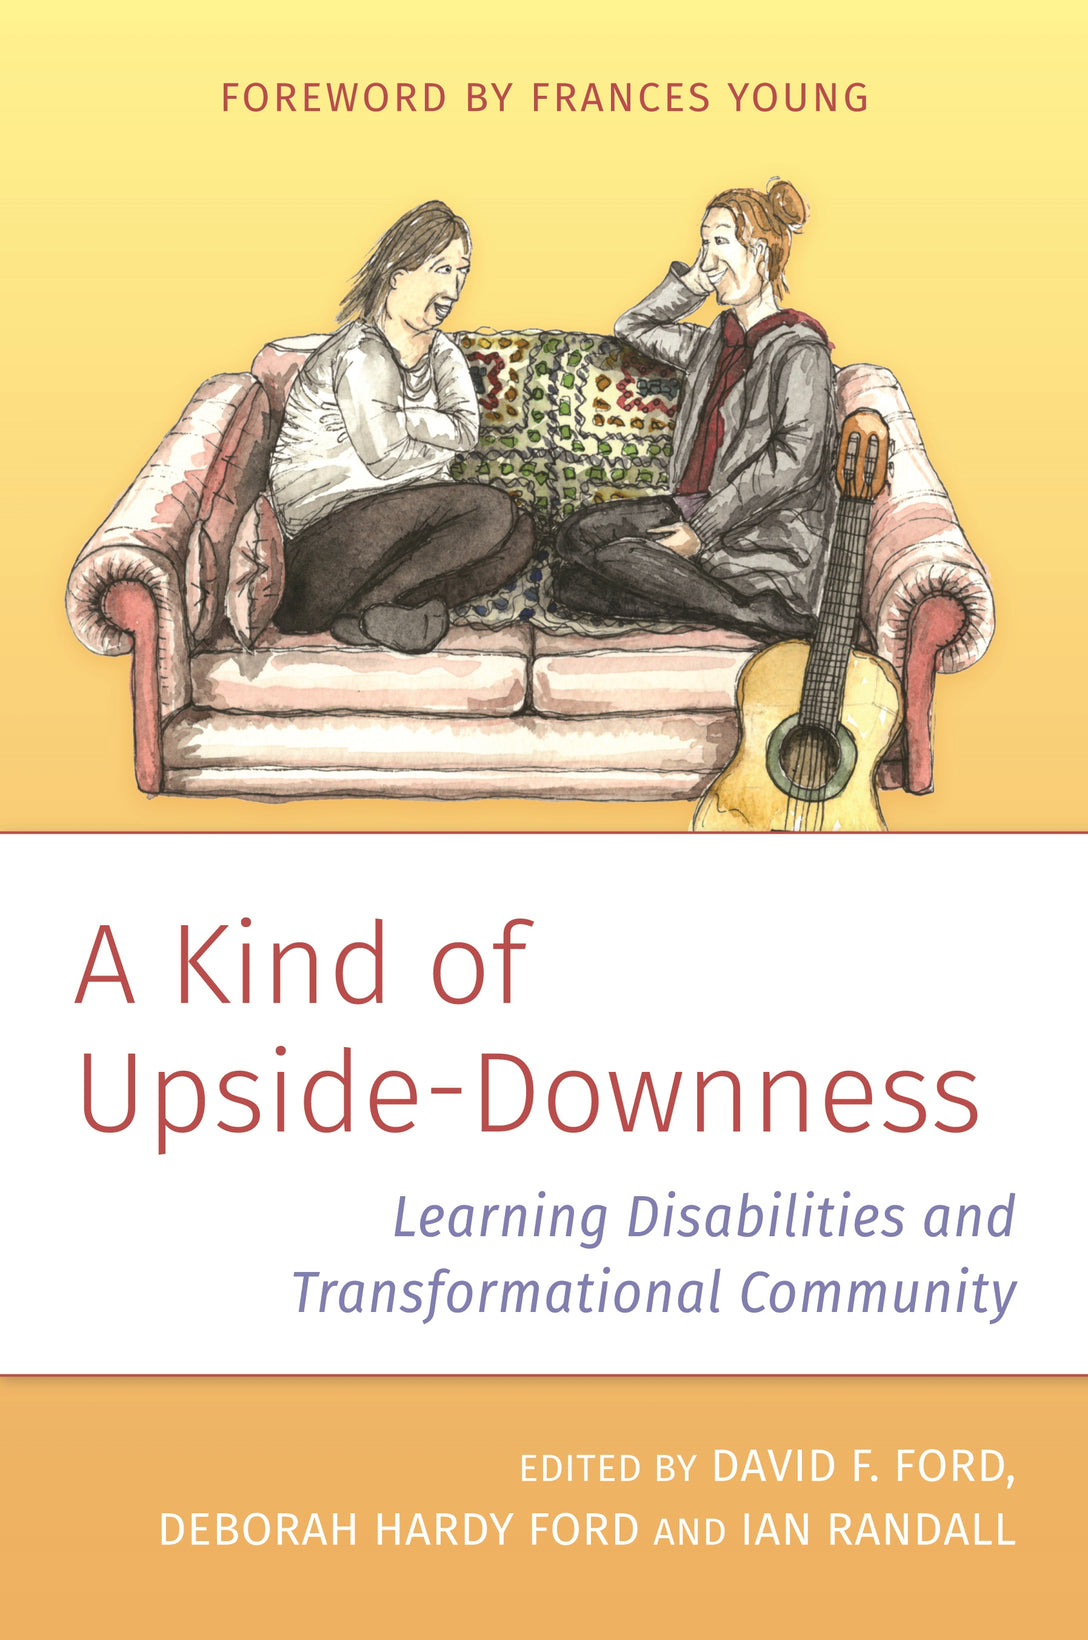 A Kind of Upside-Downness by David Ford, Deborah Ford, Ian Randall, No Author Listed